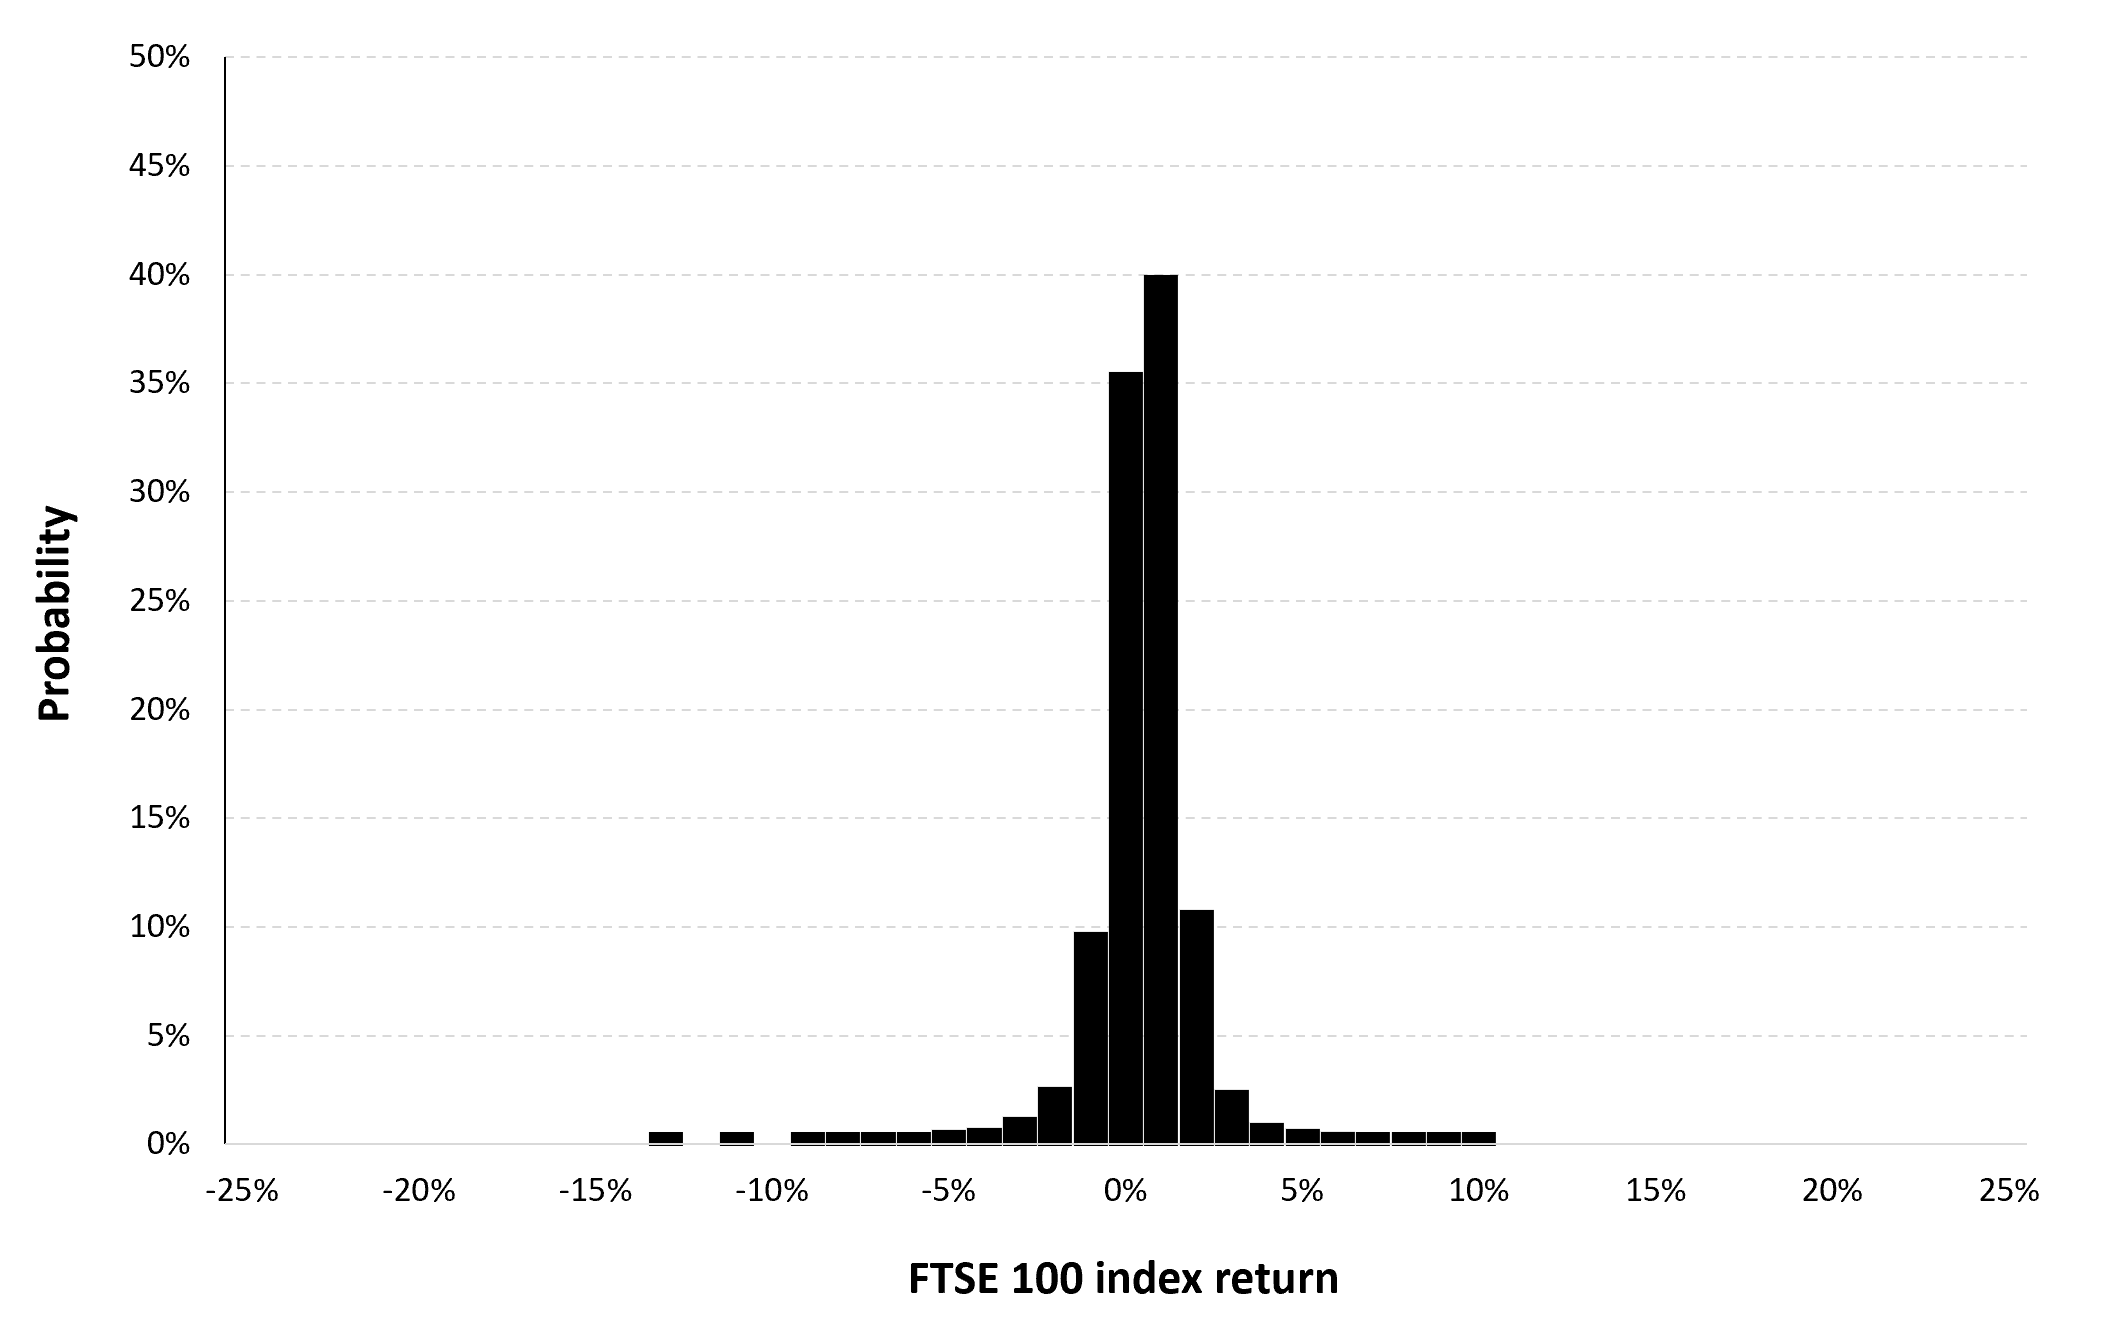 Historical distribution of the daily FTSE 100 index returns